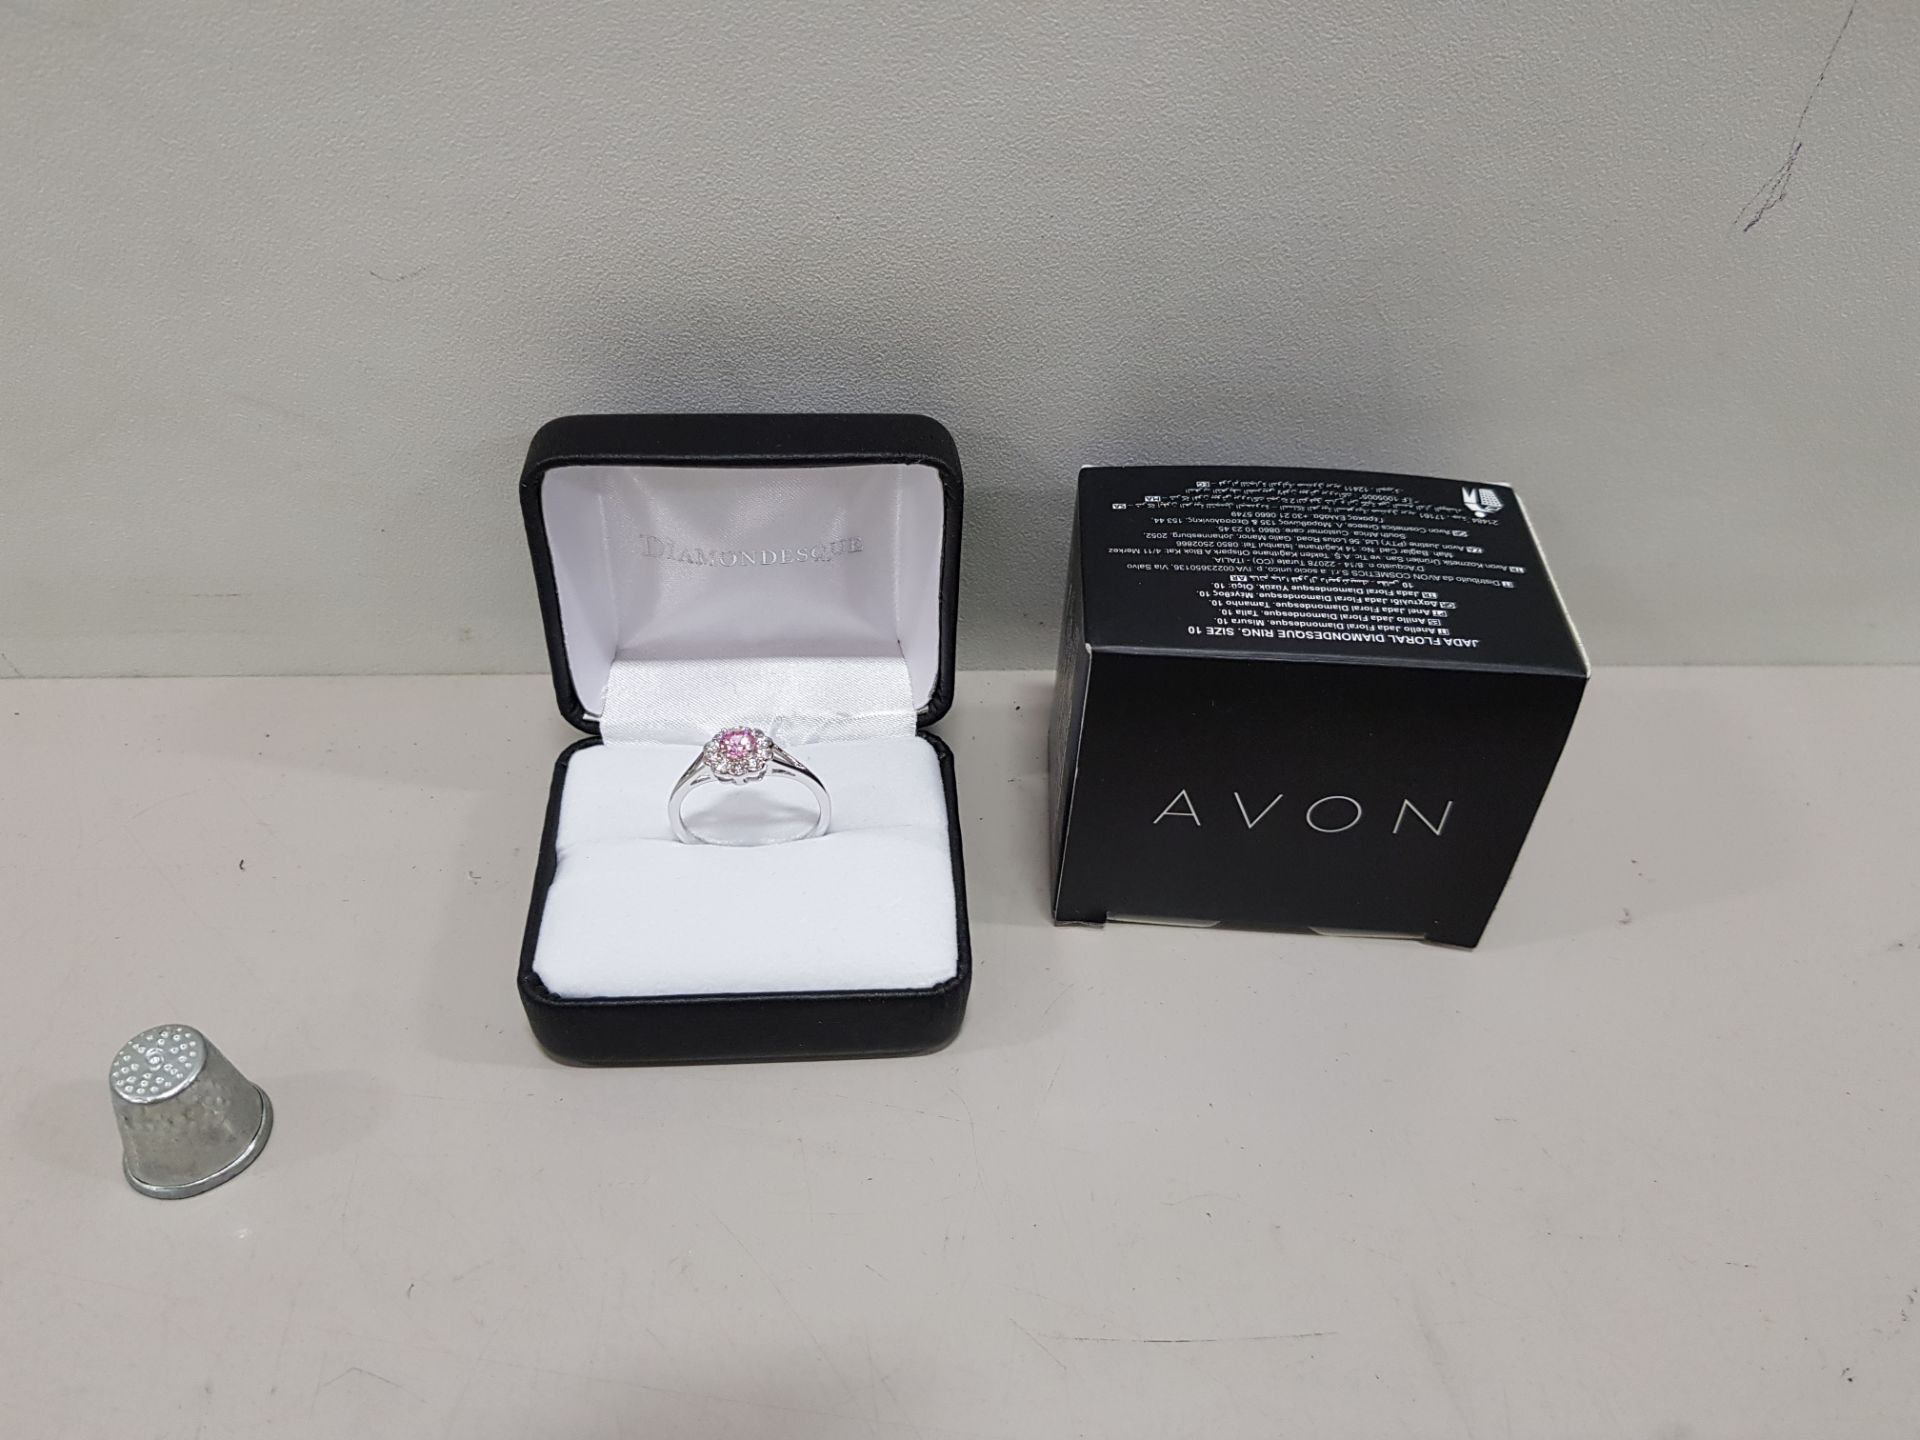 32 X BRAND NEW AVON JADA FLORAL DIAMONDESQUE RING SIZE 10 COMES IN GIFT BOX ALL INDIVIDUALLY BOXED